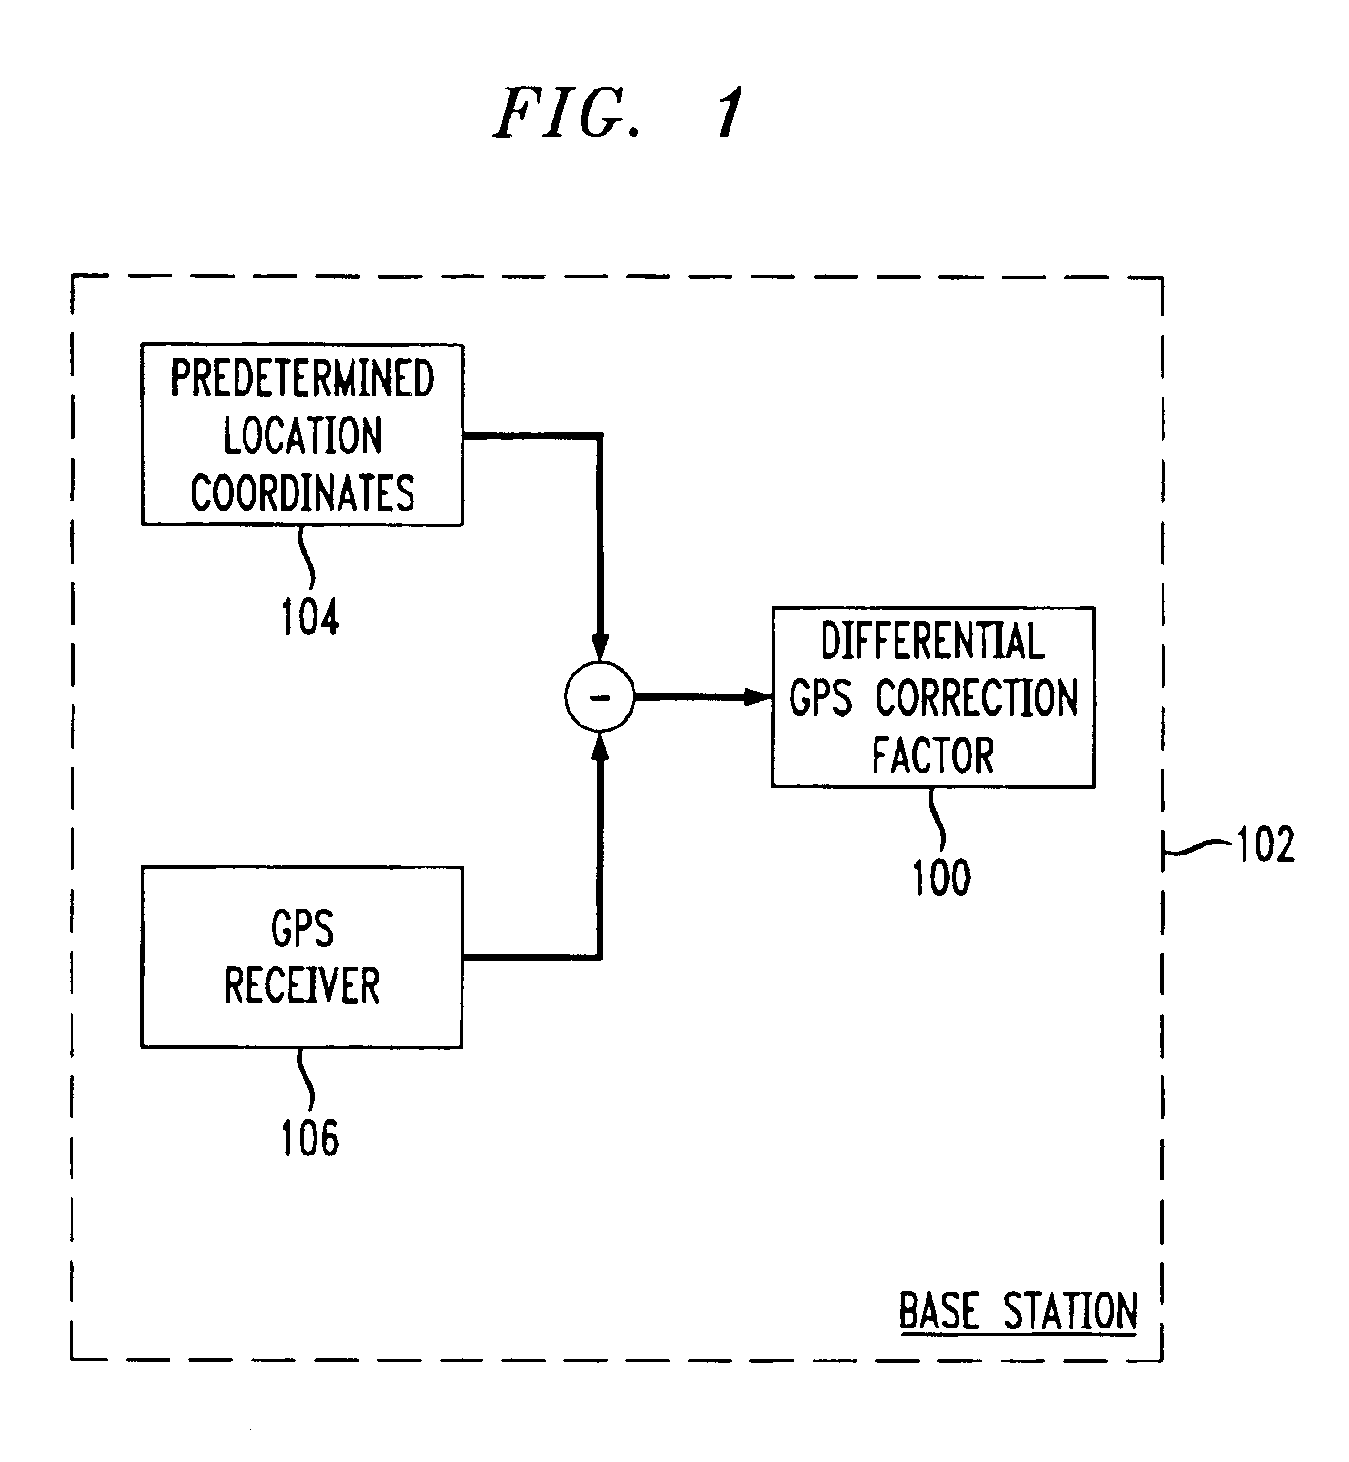 Differential GPS and/or glonass with wireless communications capability